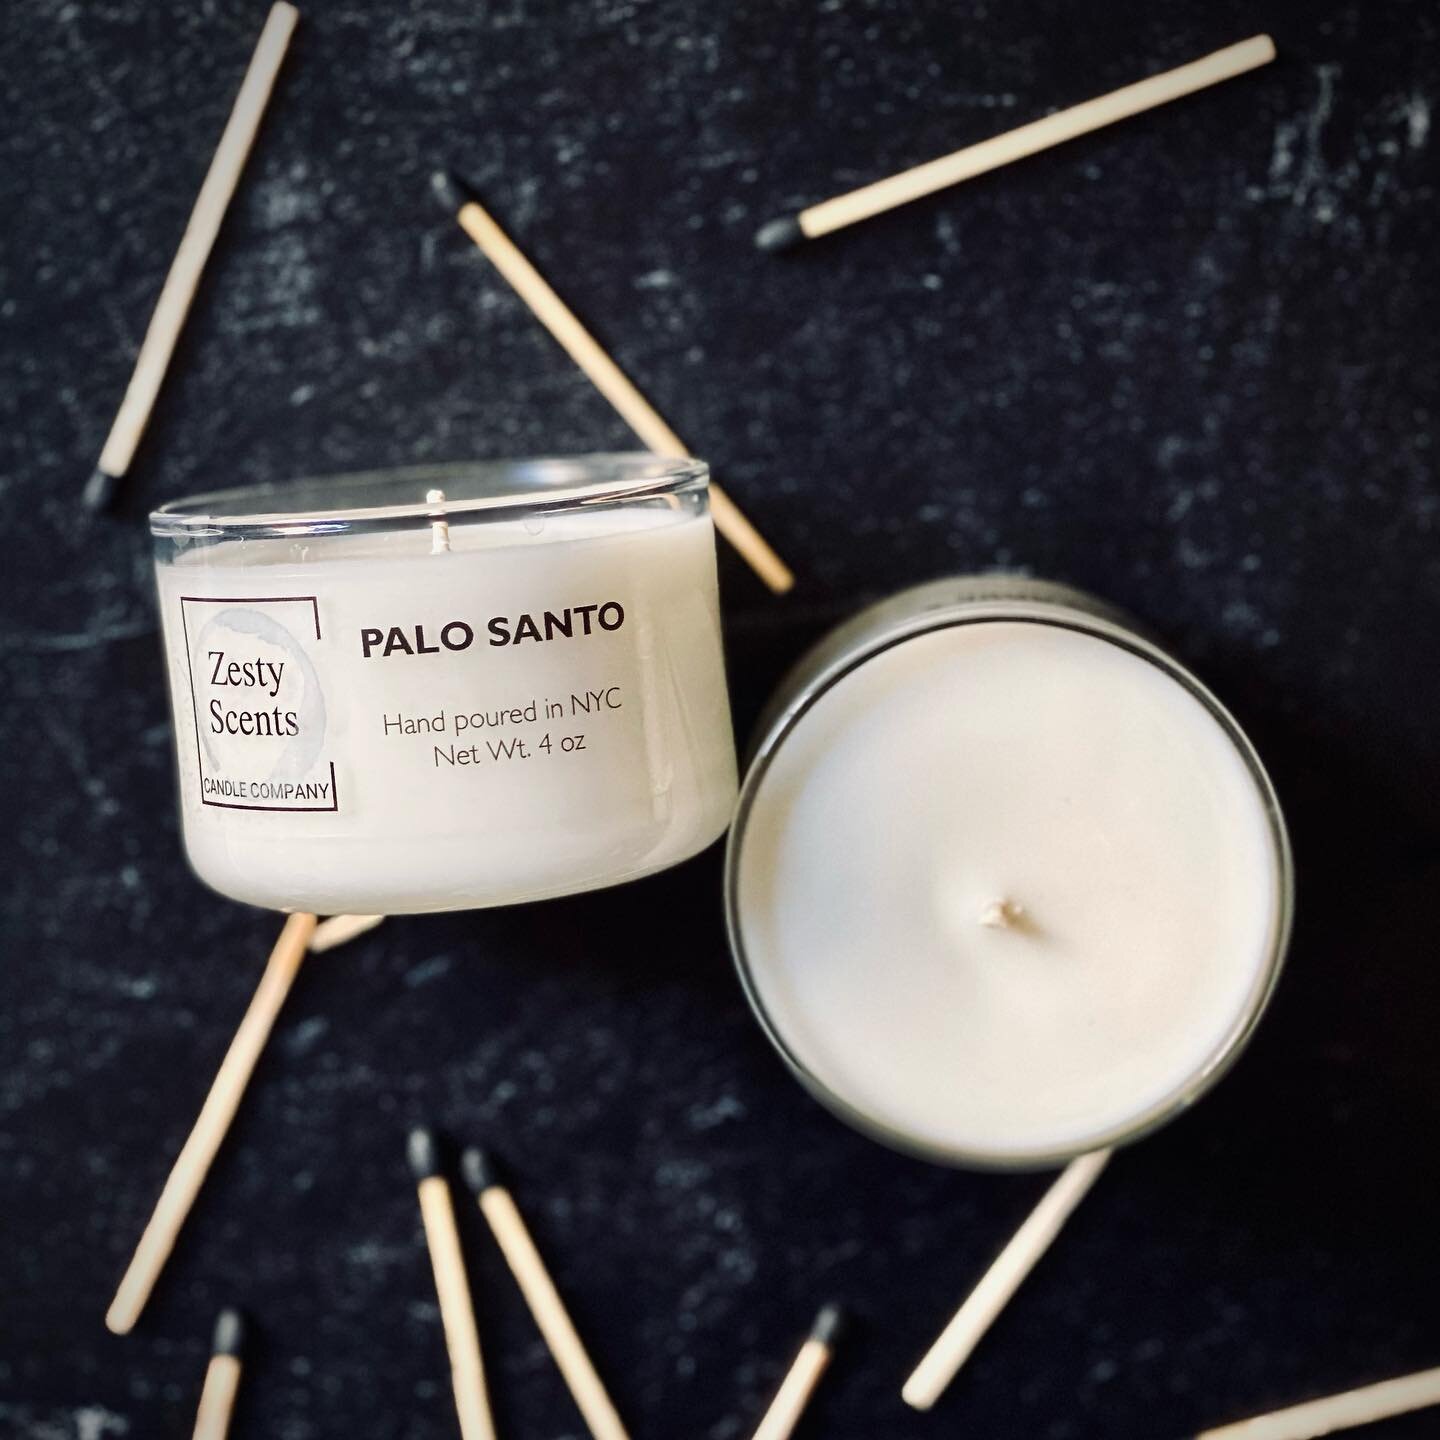 Palo Santo 🪔 - this scent went through many trials of error to mimic the mellow earthy and smokey aromas of a true Palo Santo stick⚡️

These 4oz. mini candles are perfect for restrooms and smaller living spaces. They burn for 25+ hours and are simpl